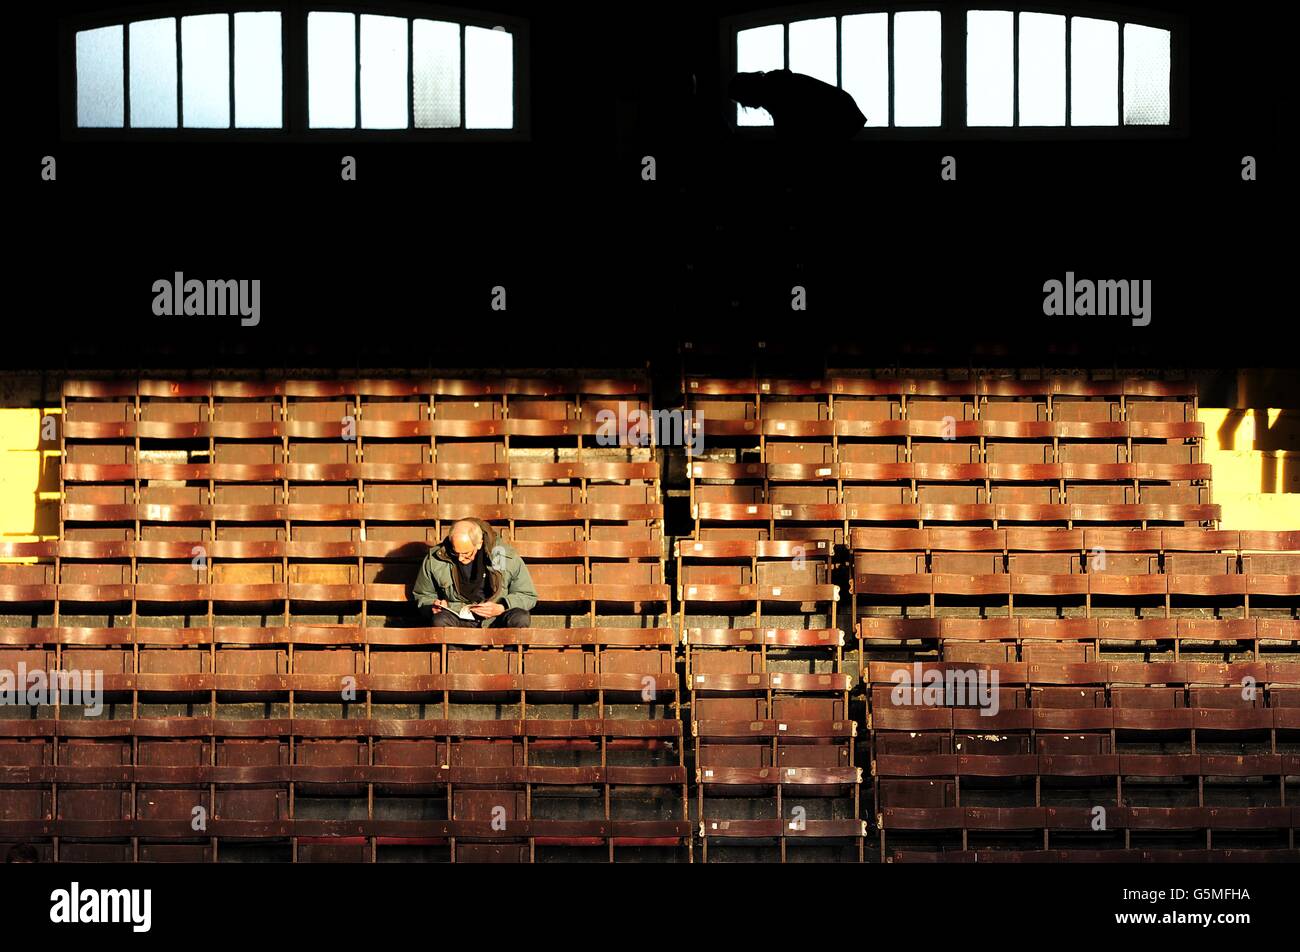 Soccer - Barclays Premier League - Fulham v Sunderland - Craven Cottage. A single fan takes his seat early in the wooden seating area of Craven Cottage for the match against Sunderland Stock Photo